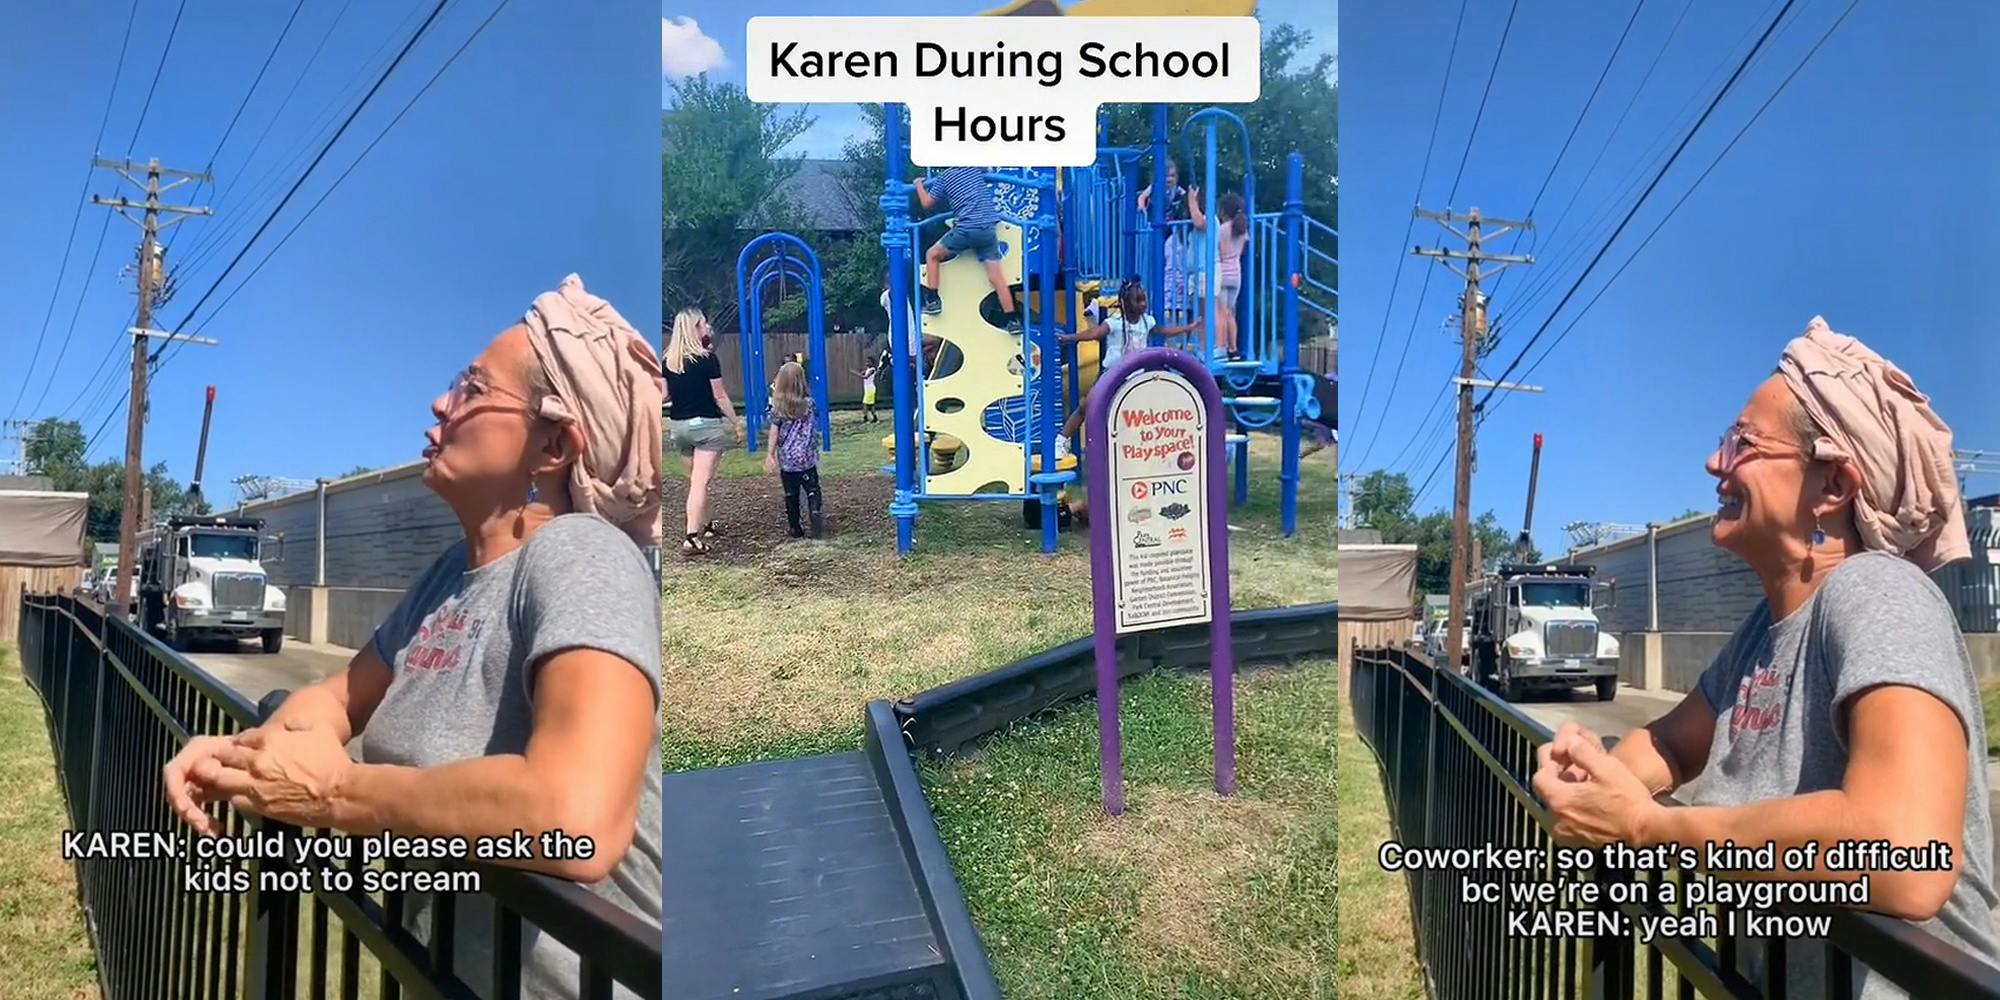 'Karen' on park fence speaking caption "KAREN: could you please ask the kids not to scream" (l) park with children playing caption "Karen During School Hours" (c) 'Karen' leaning on park fence speaking caption "Coworker: so that's kind of difficult bc we're on a playground KAREN: yeah I know" (r)